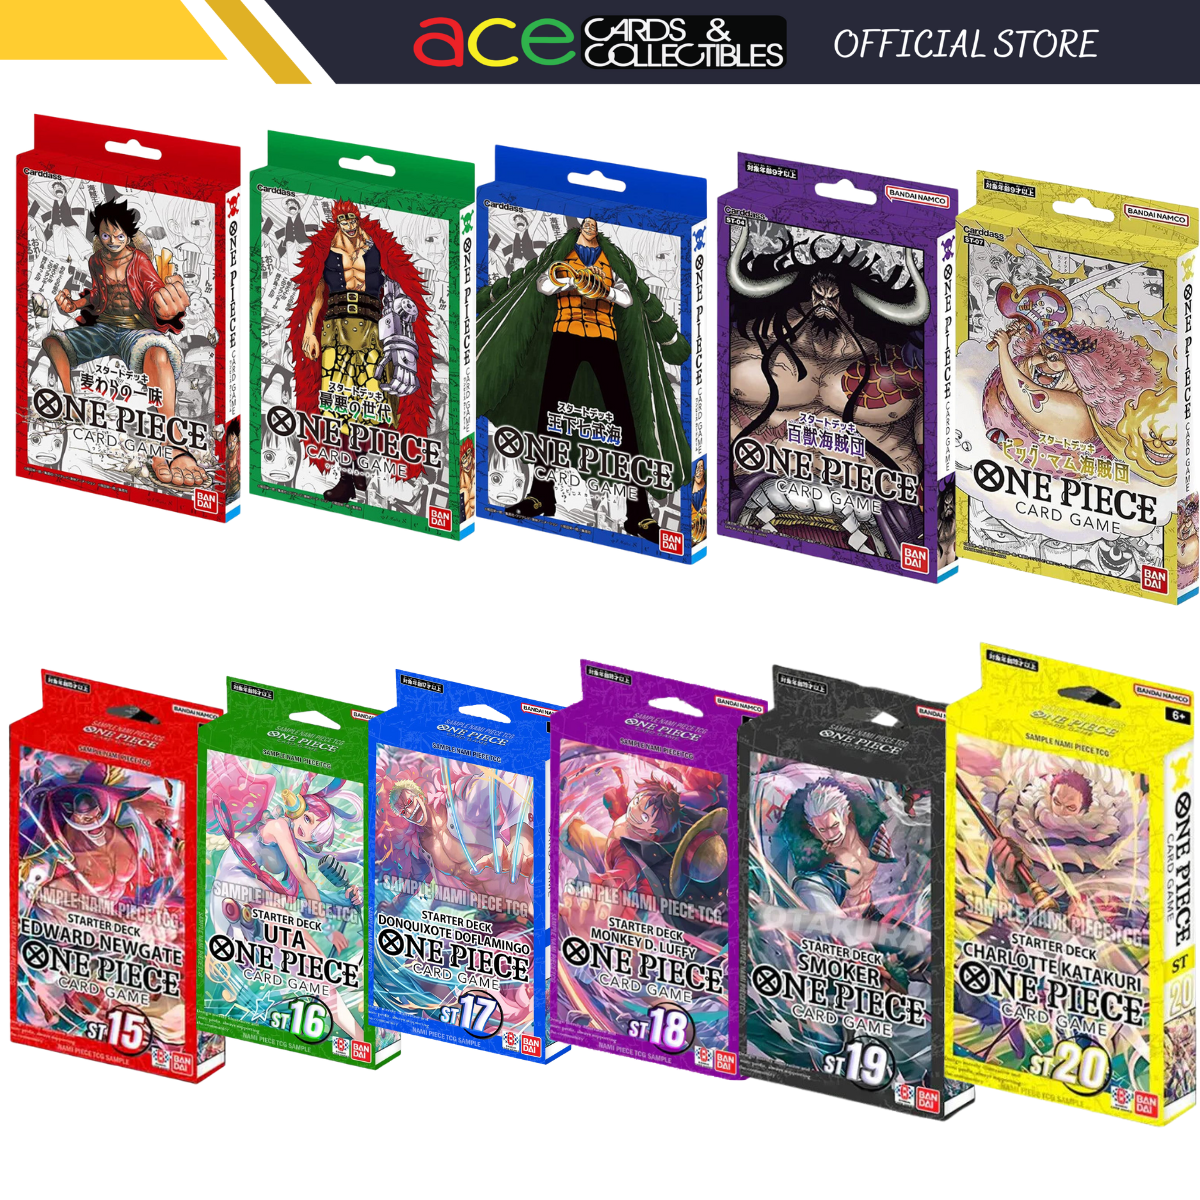 One Piece Card Game Starter Deck(ST-01 -ST-20) (Japanese)-ST01-001 &amp; ST02-00-Bandai-Ace Cards &amp; Collectibles